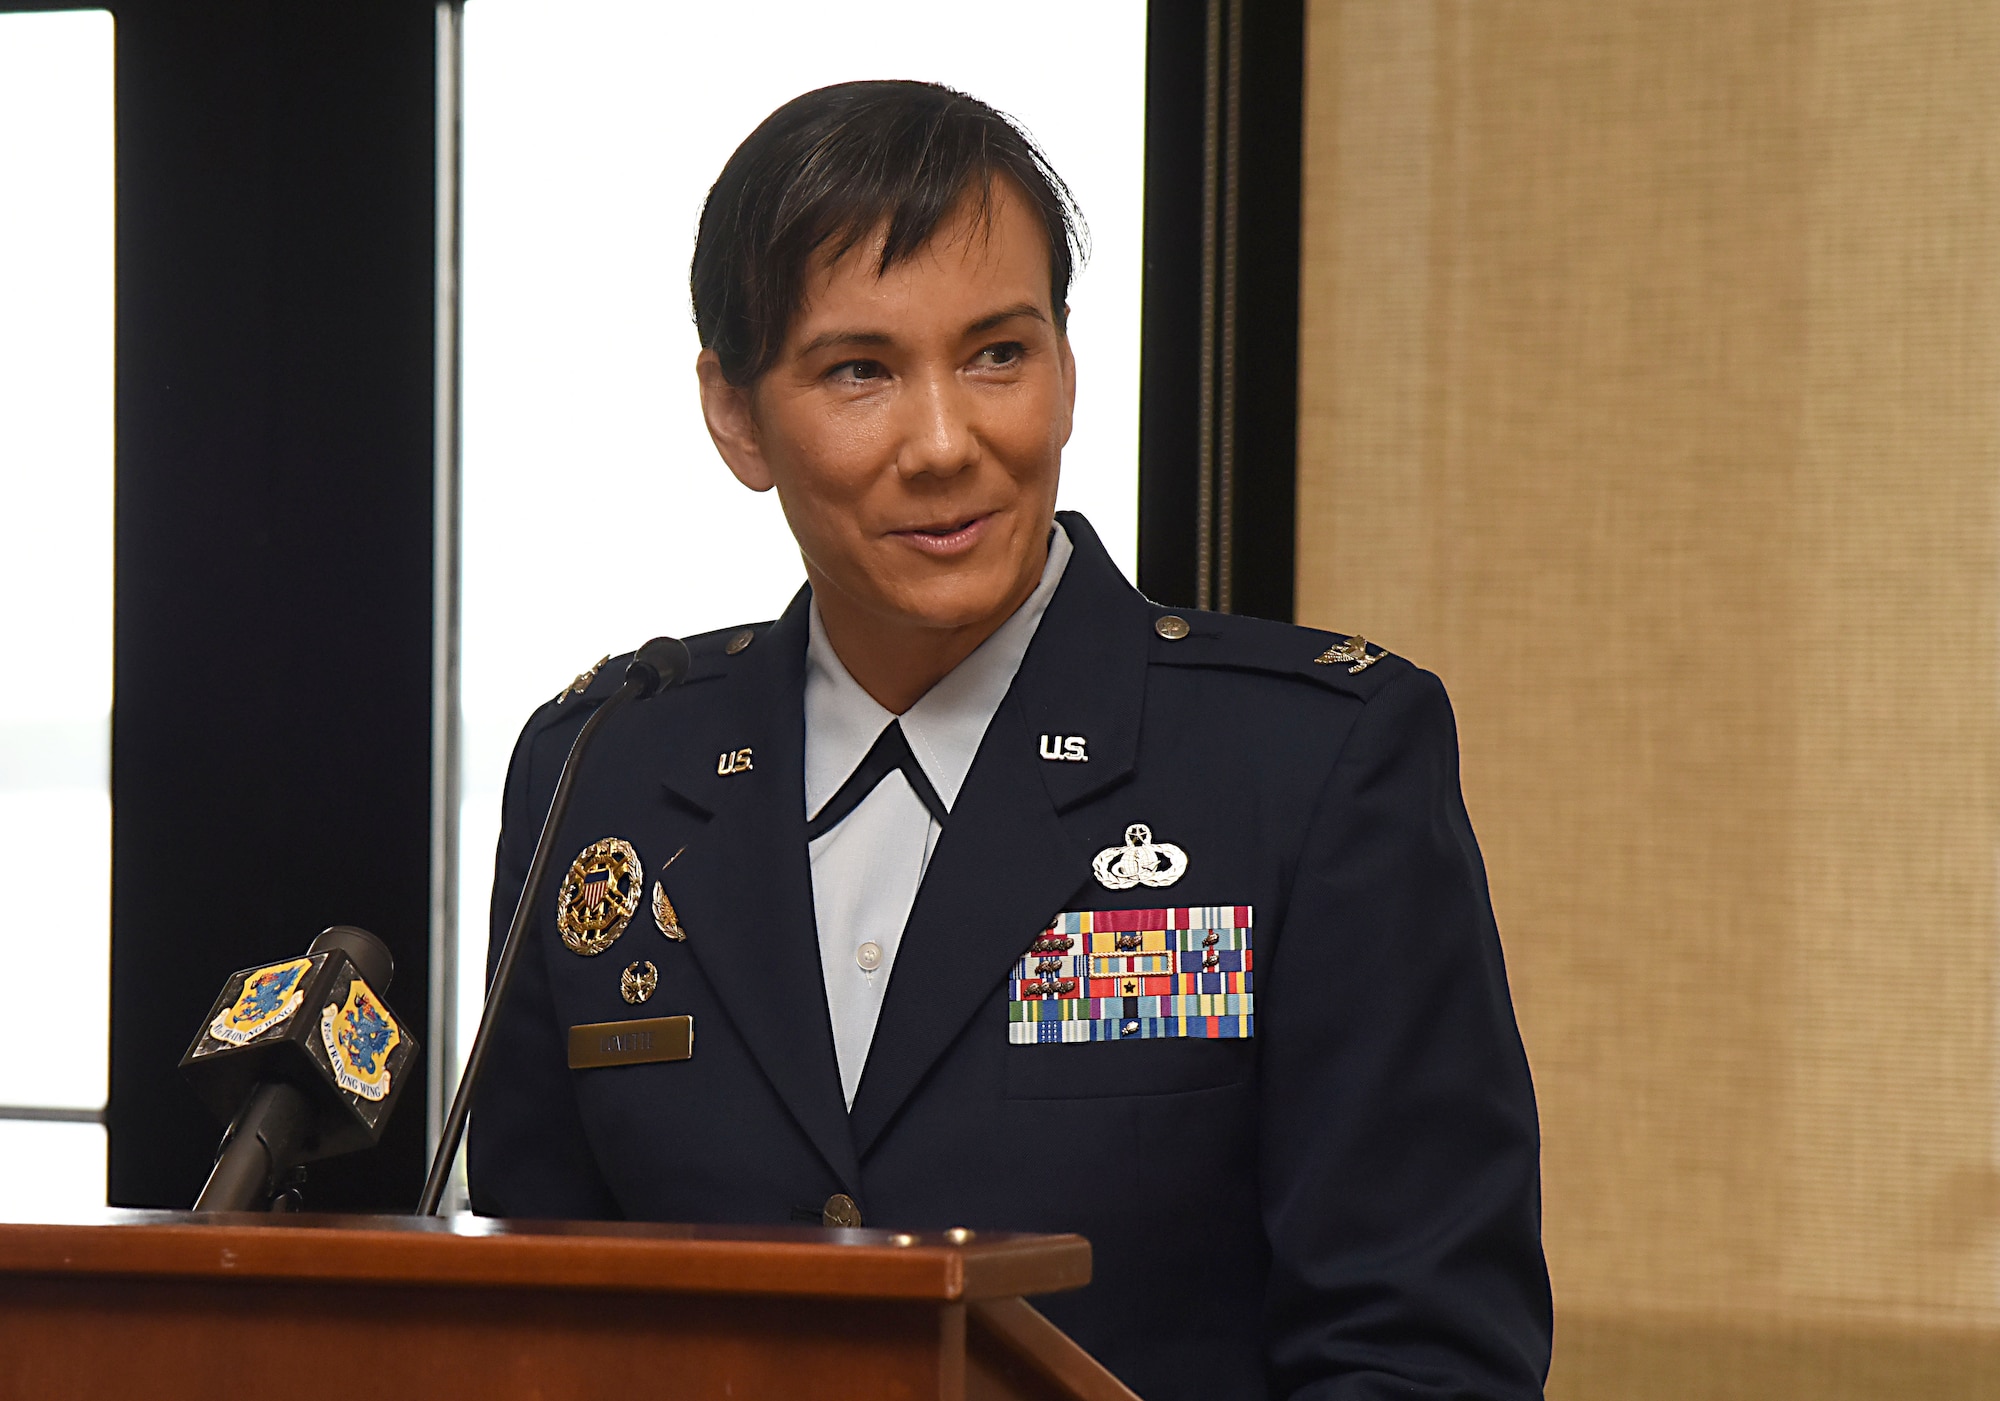 Col. Debra Lovette, 81st Training Wing commander, gives her speech during a change of command ceremony at the Bay Breeze Event Center June 2, 2017, on Keesler Air Force Base, Miss. Lovette assumed command from Col. Michele Edmondson. (U.S. Air Force photo by Kemberly Groue)